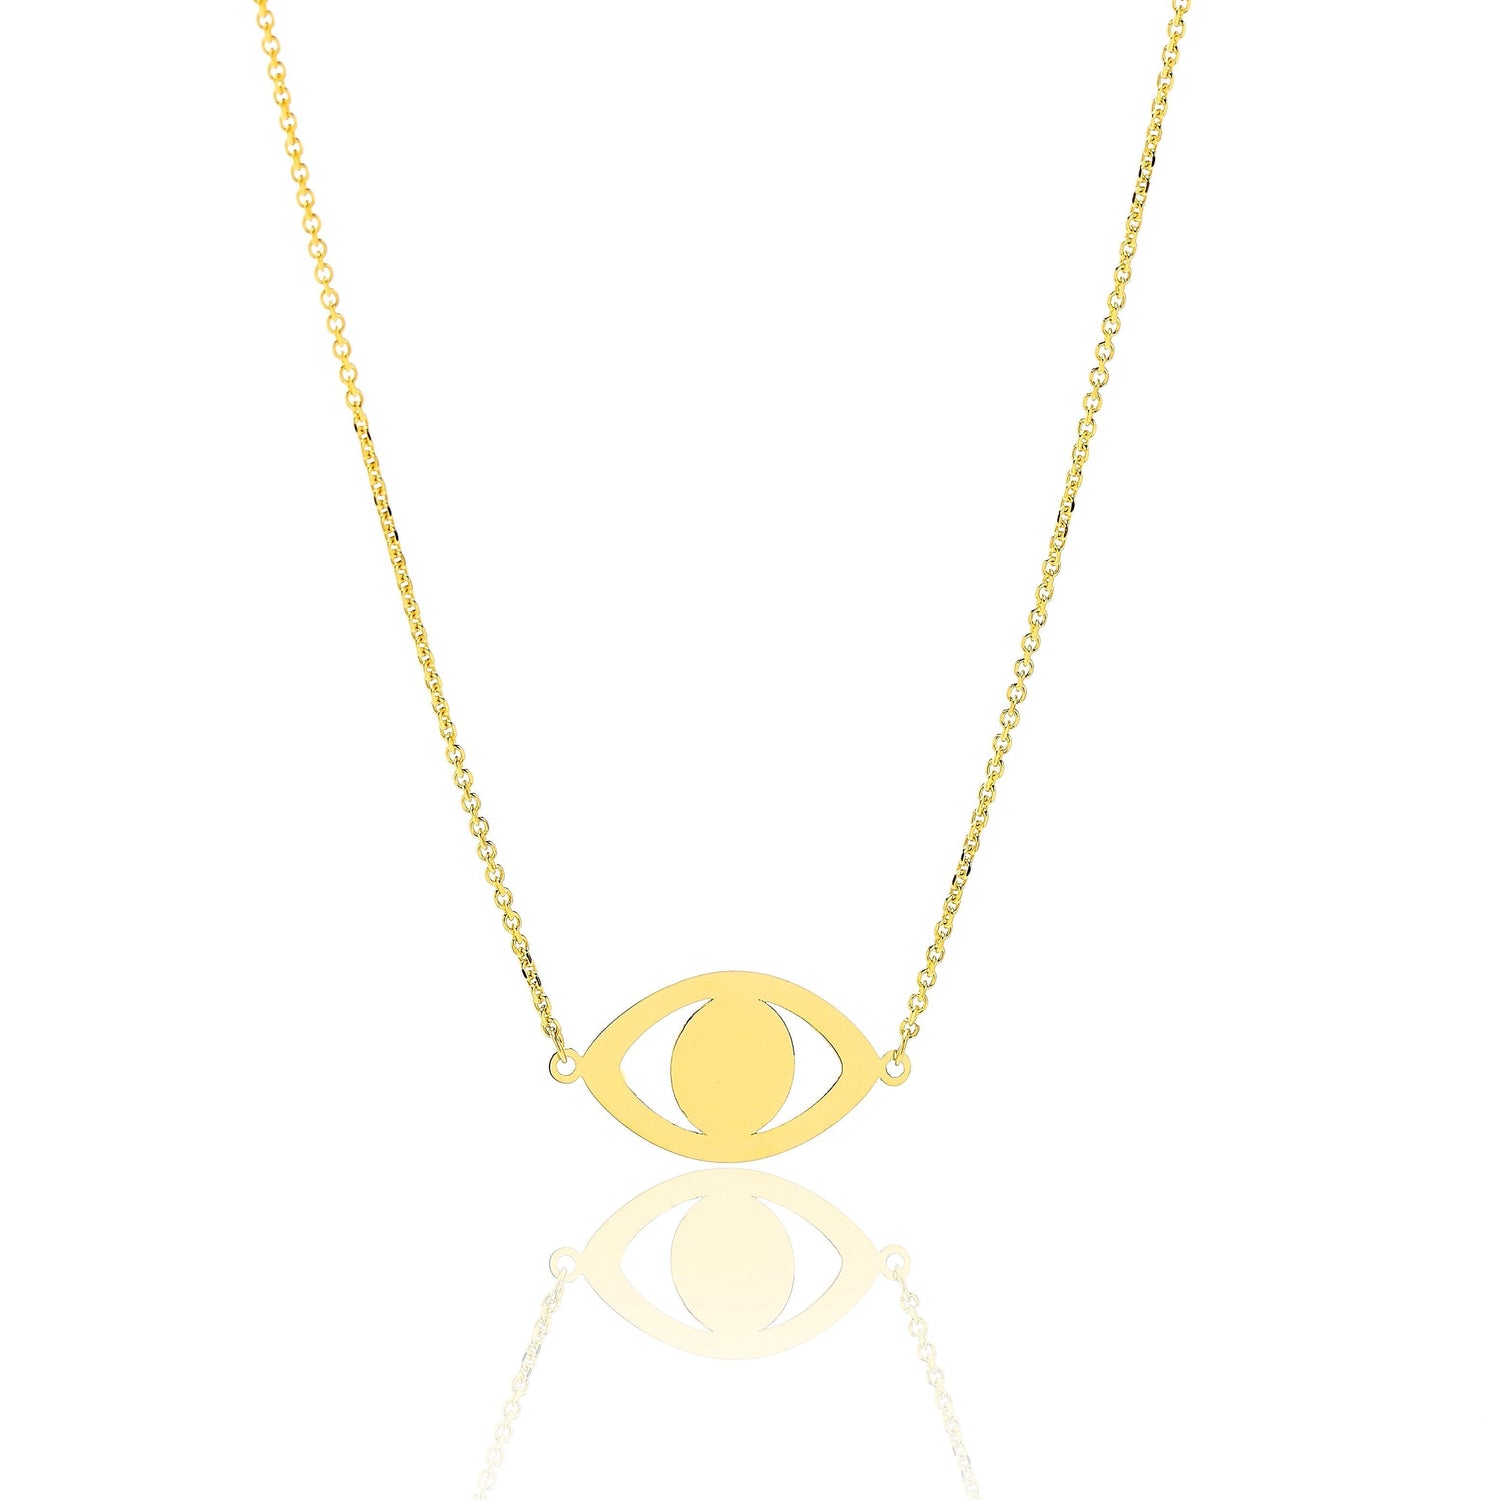 14k Yellow Gold 16 - 18 inch Extendable Evil Eye Charm Pendant Necklace